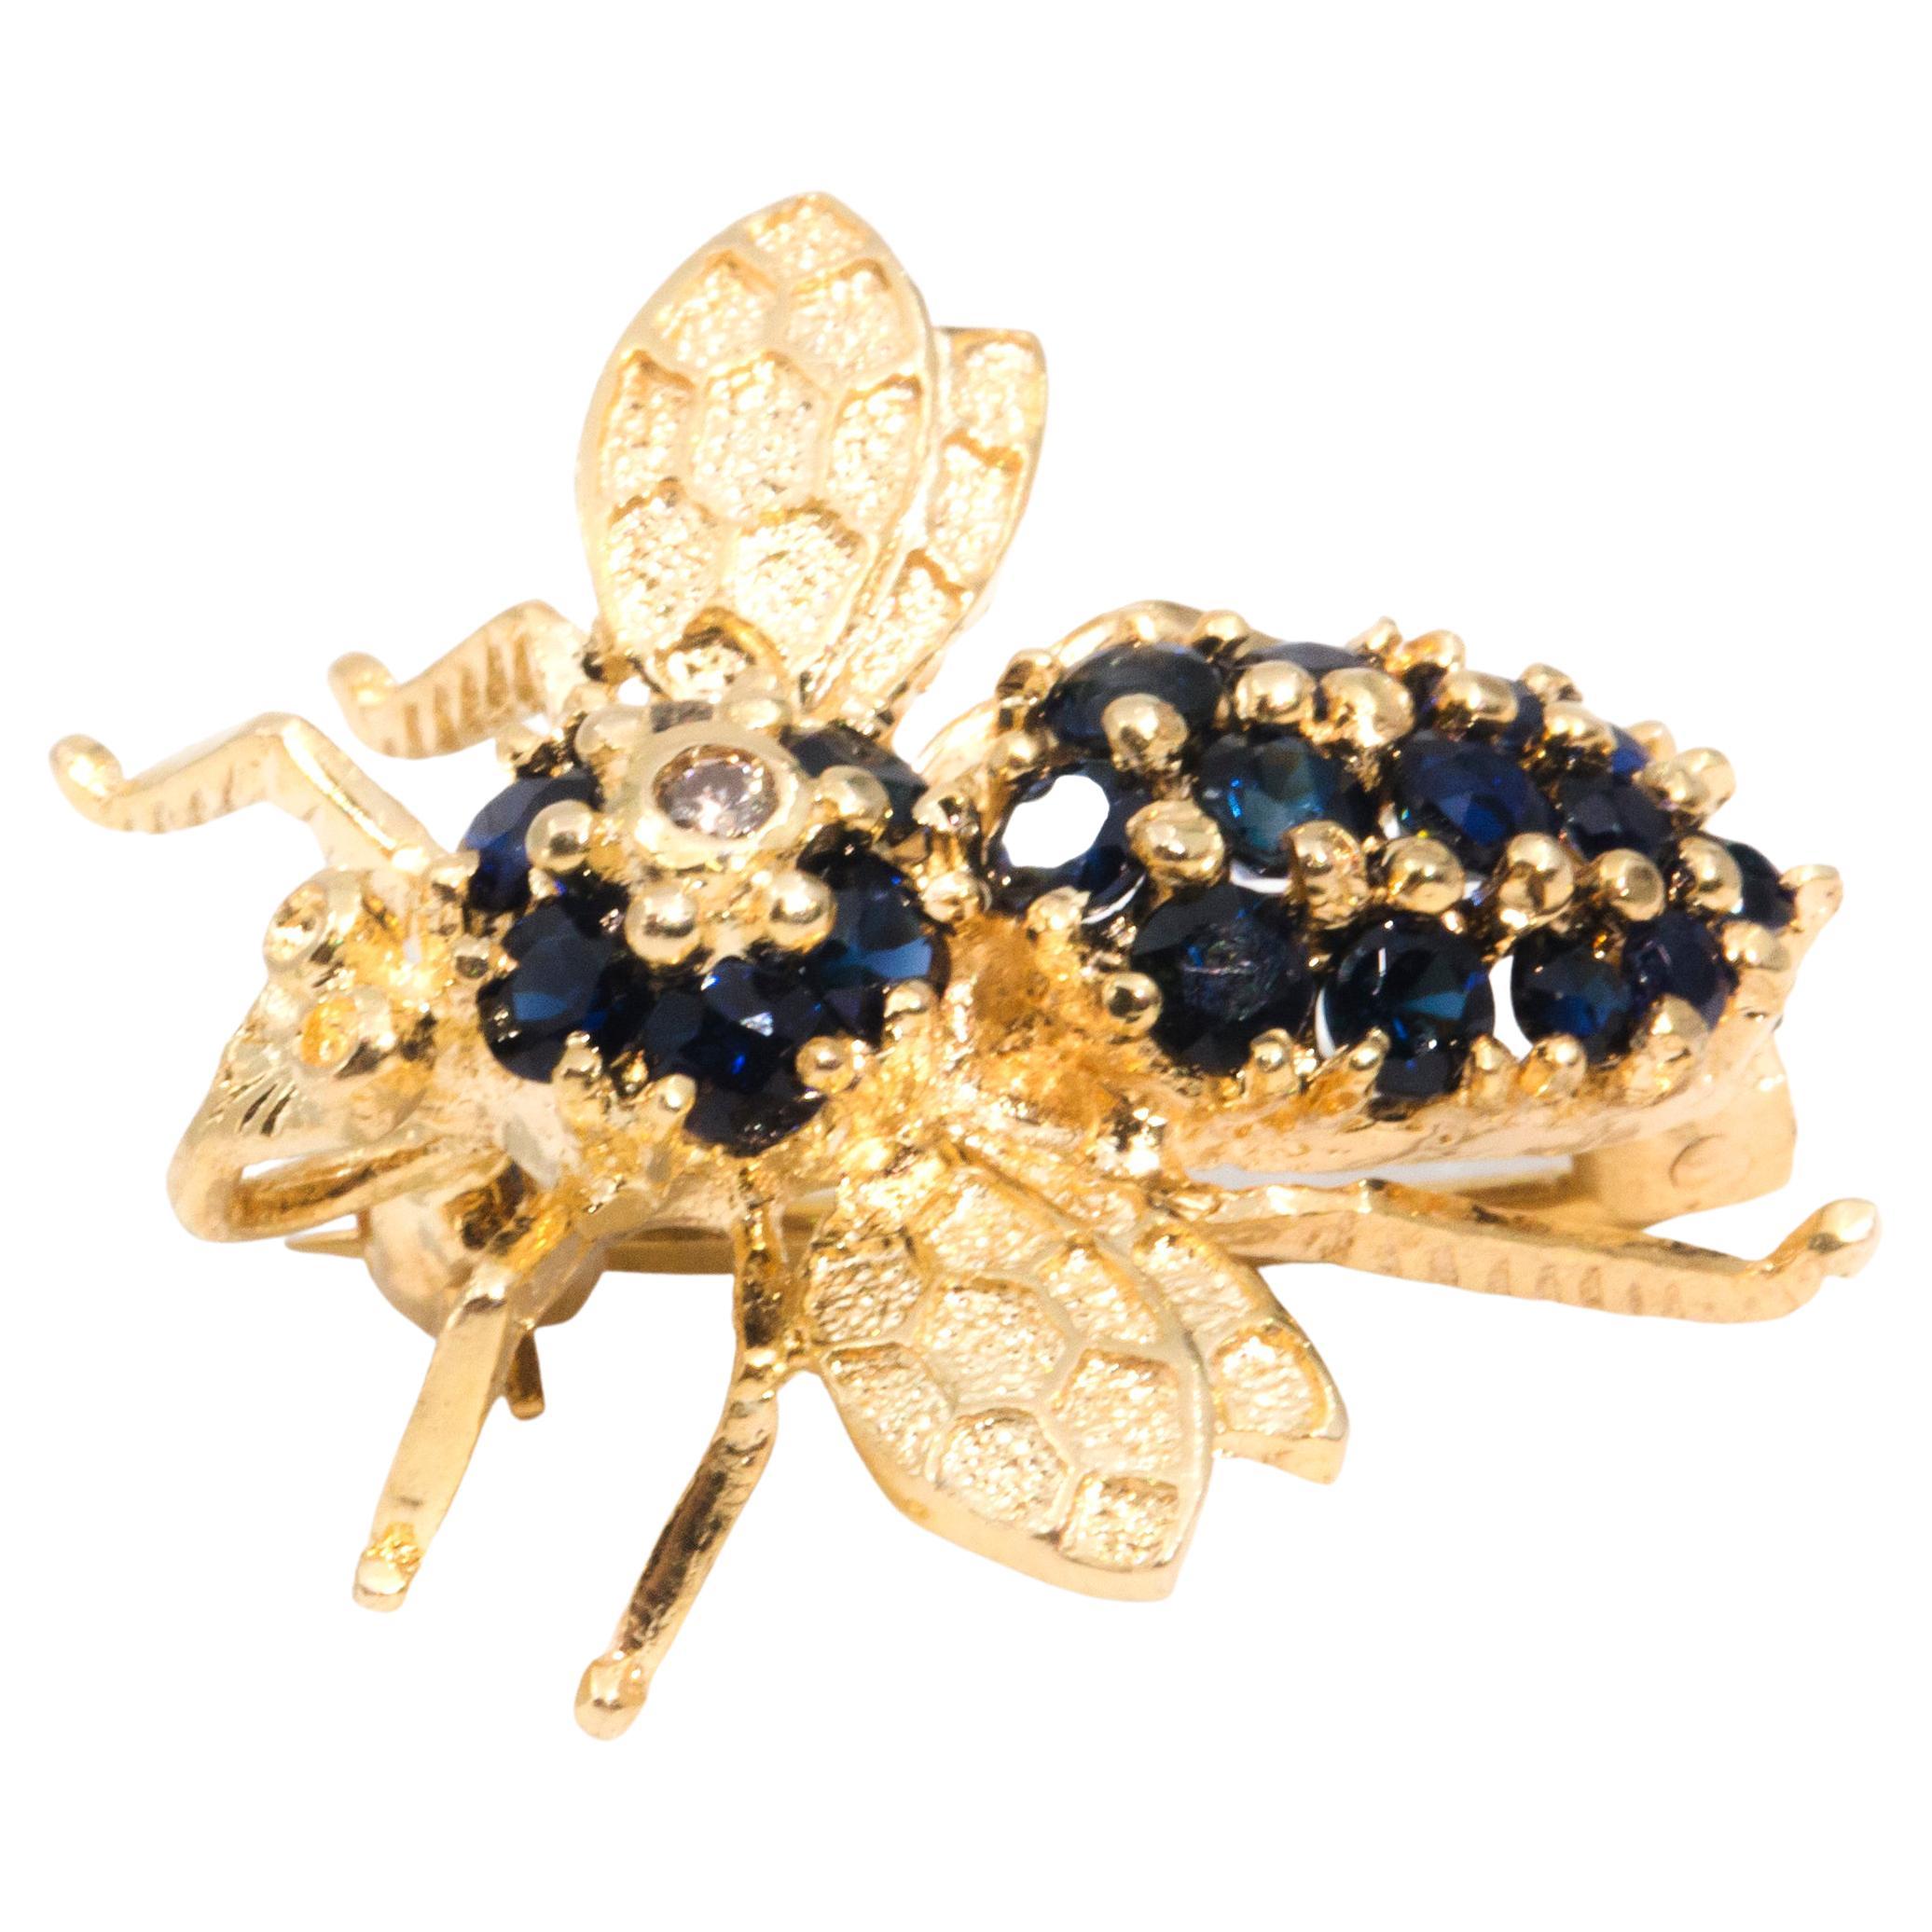 Crafted in 14 carat yellow gold, this whimsical vintage bee brooches is carefully embellished with a single sparkling round brilliant cut diamonds and alluring deep blue sapphires. She is finished with a brooch pin and roller catch. This truly